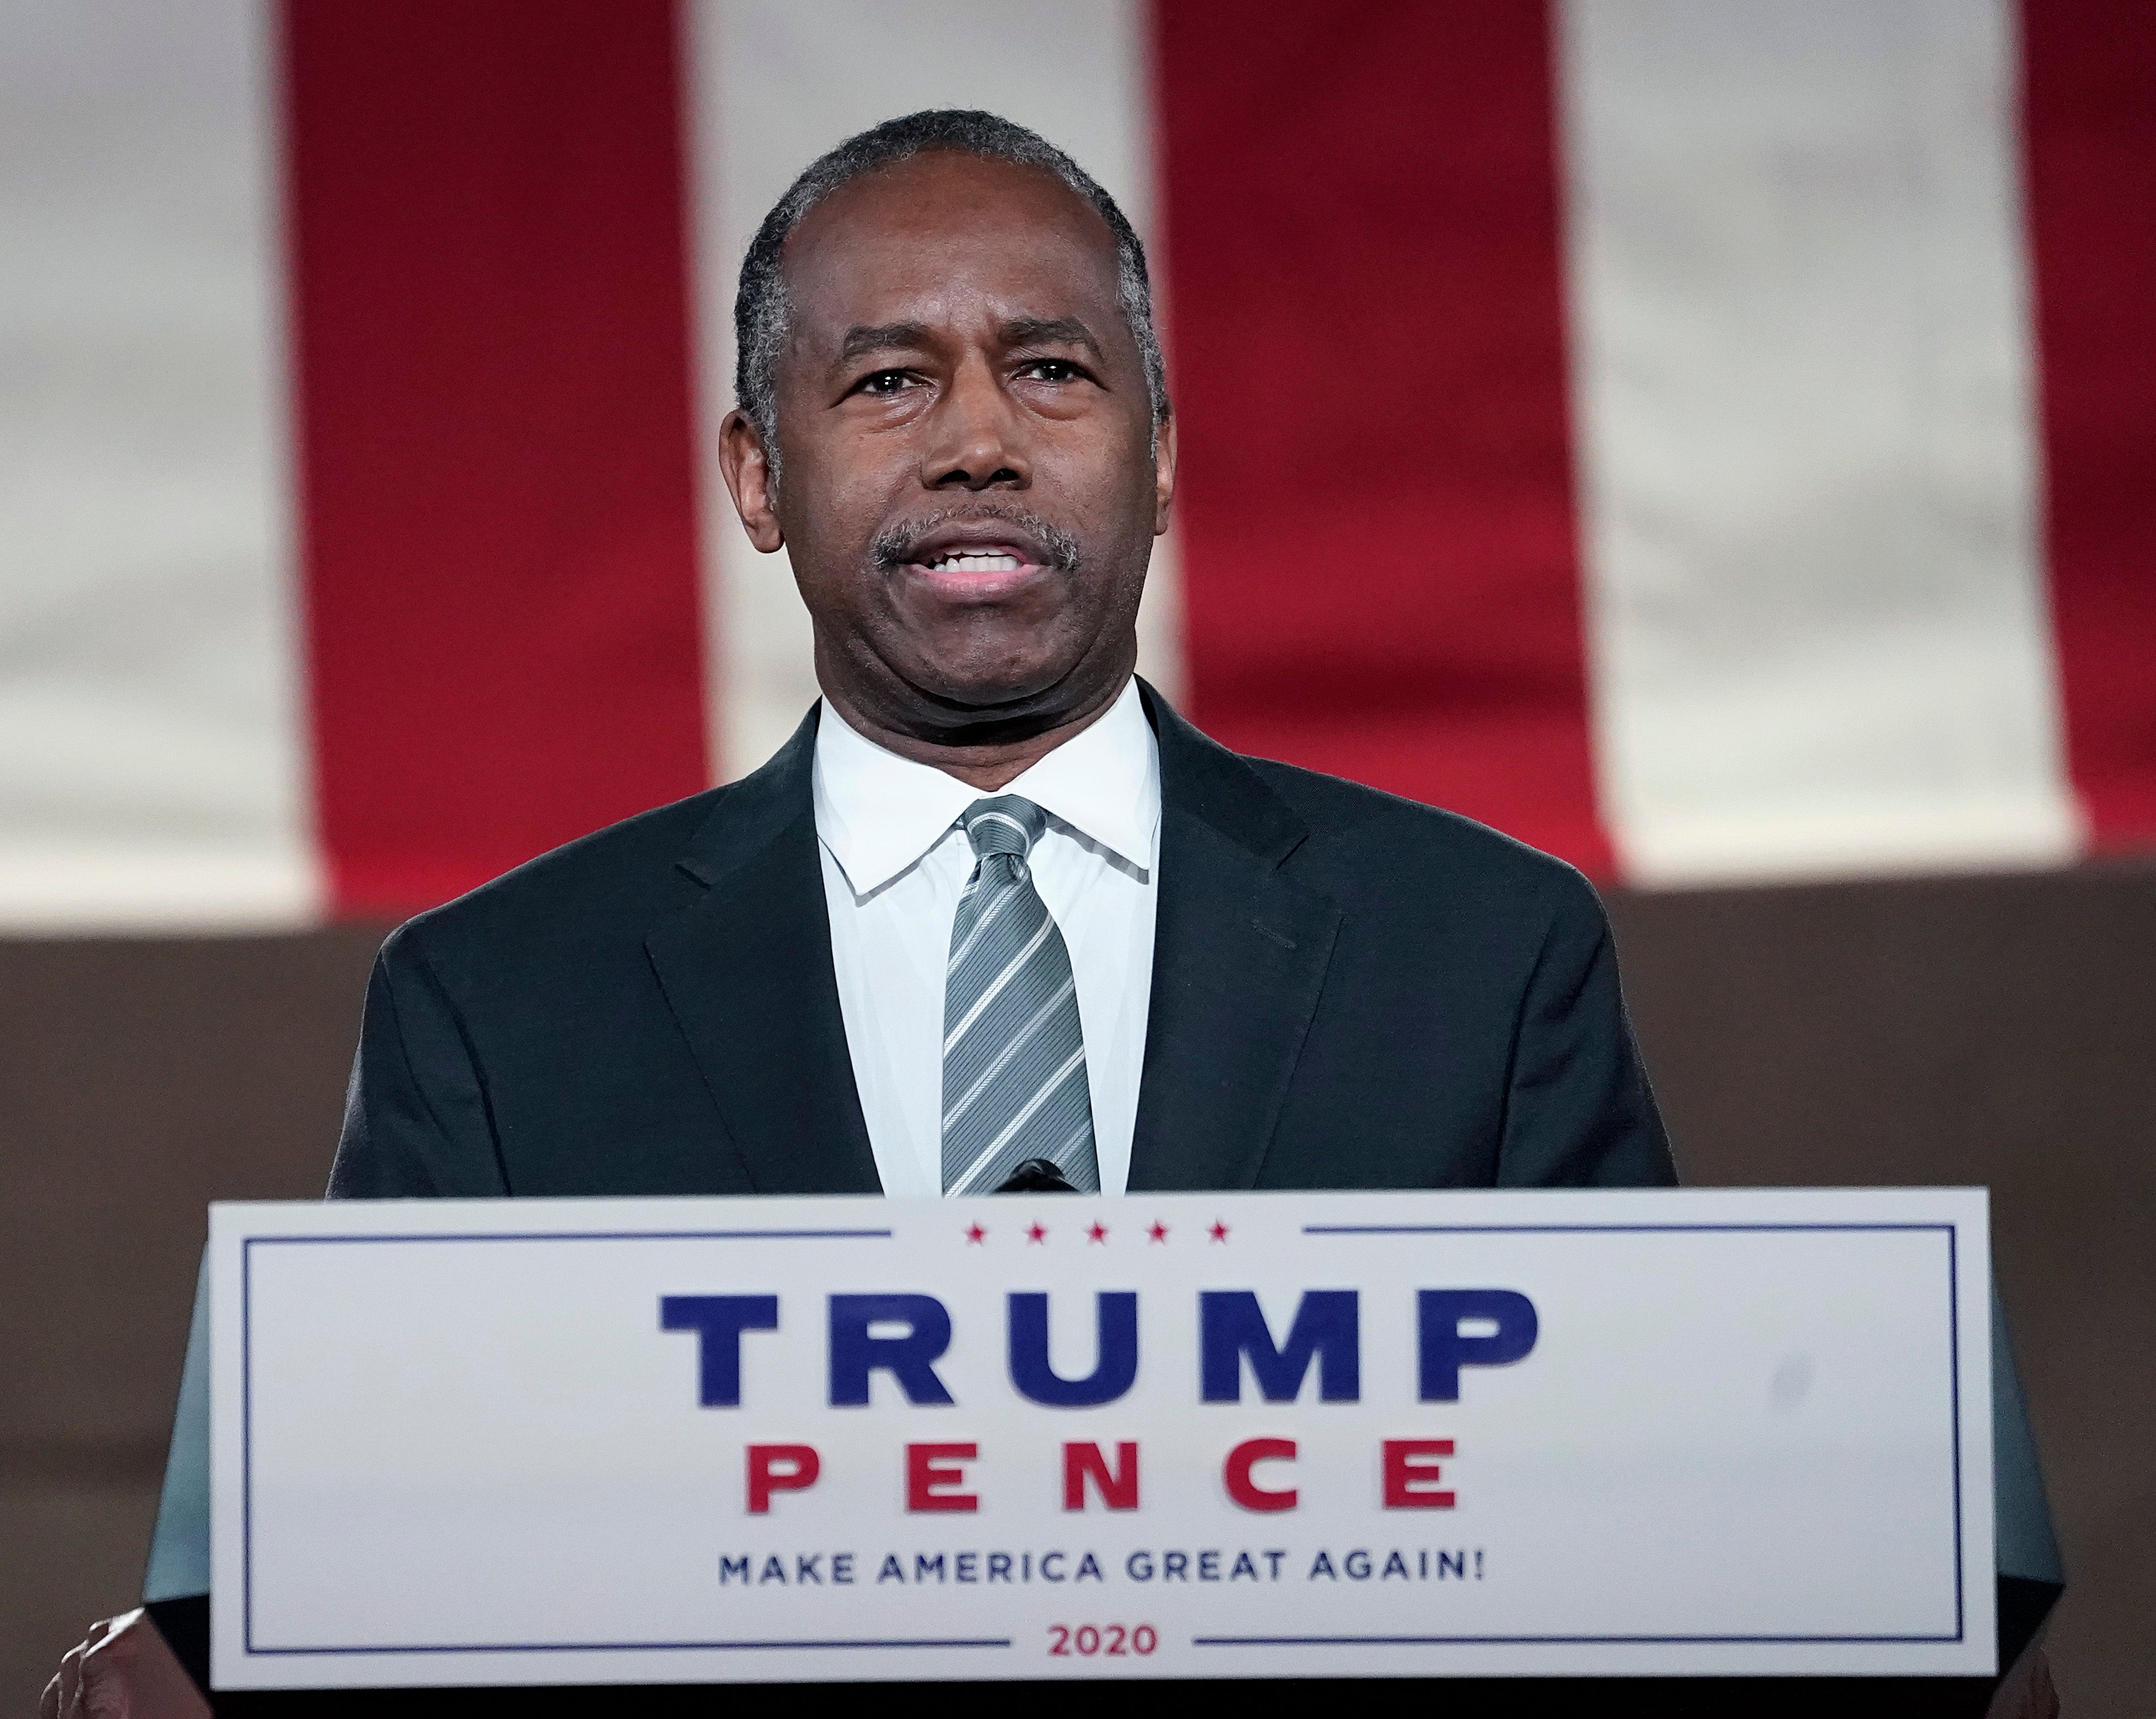 Ben Carson served as Trump’s housing secretary in his first term